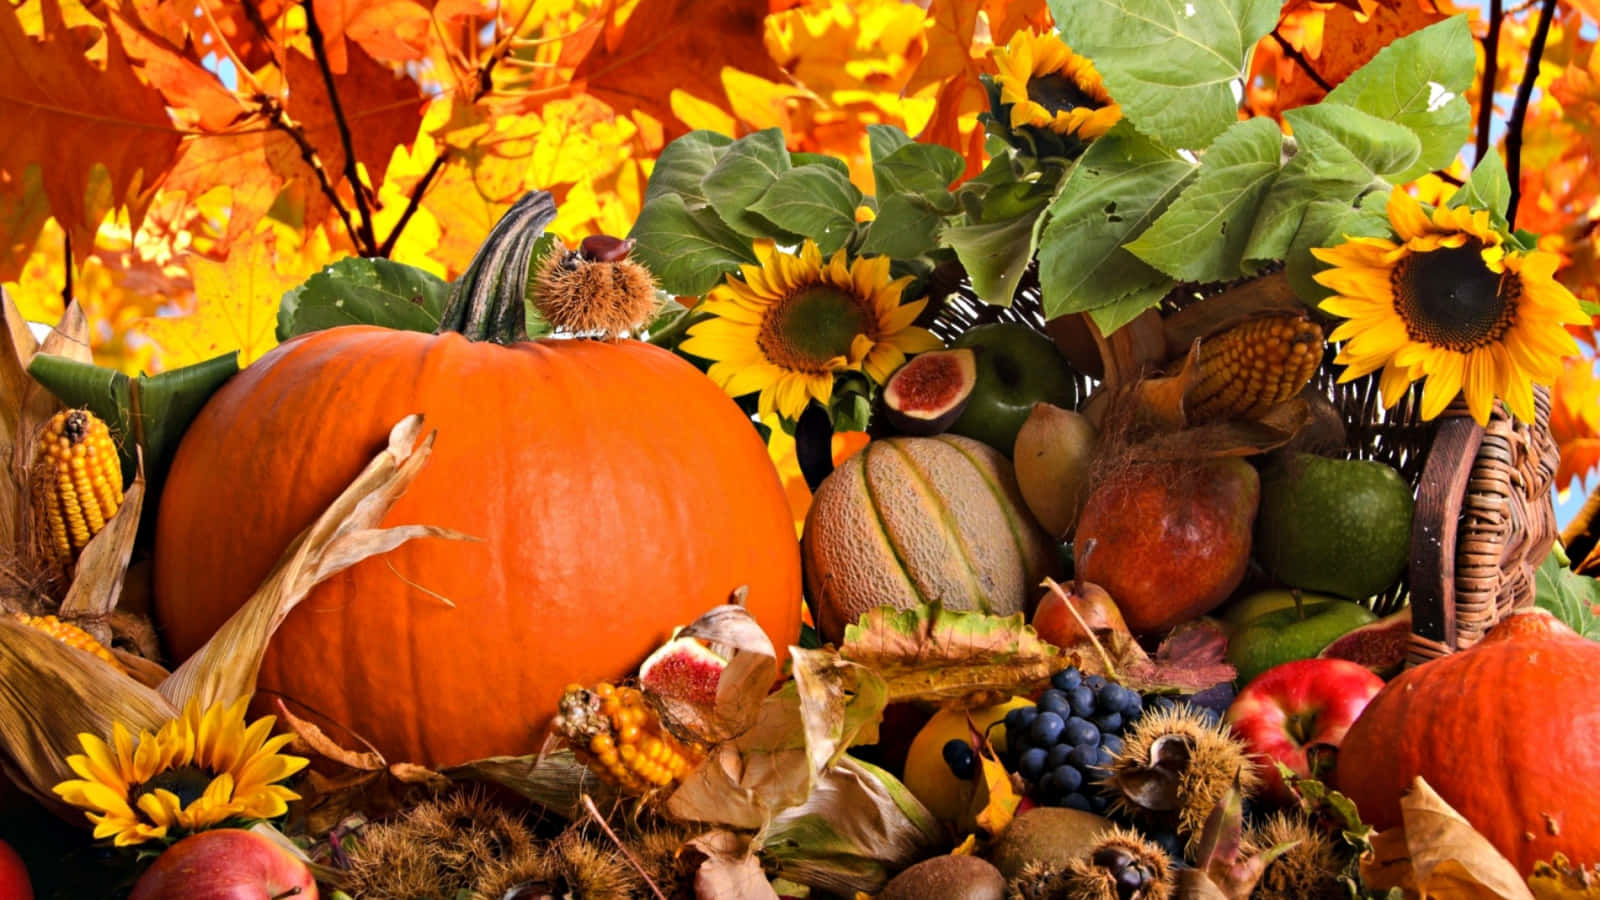 Thanksgiving Zoom Background Pumpkins Sunflowers And More